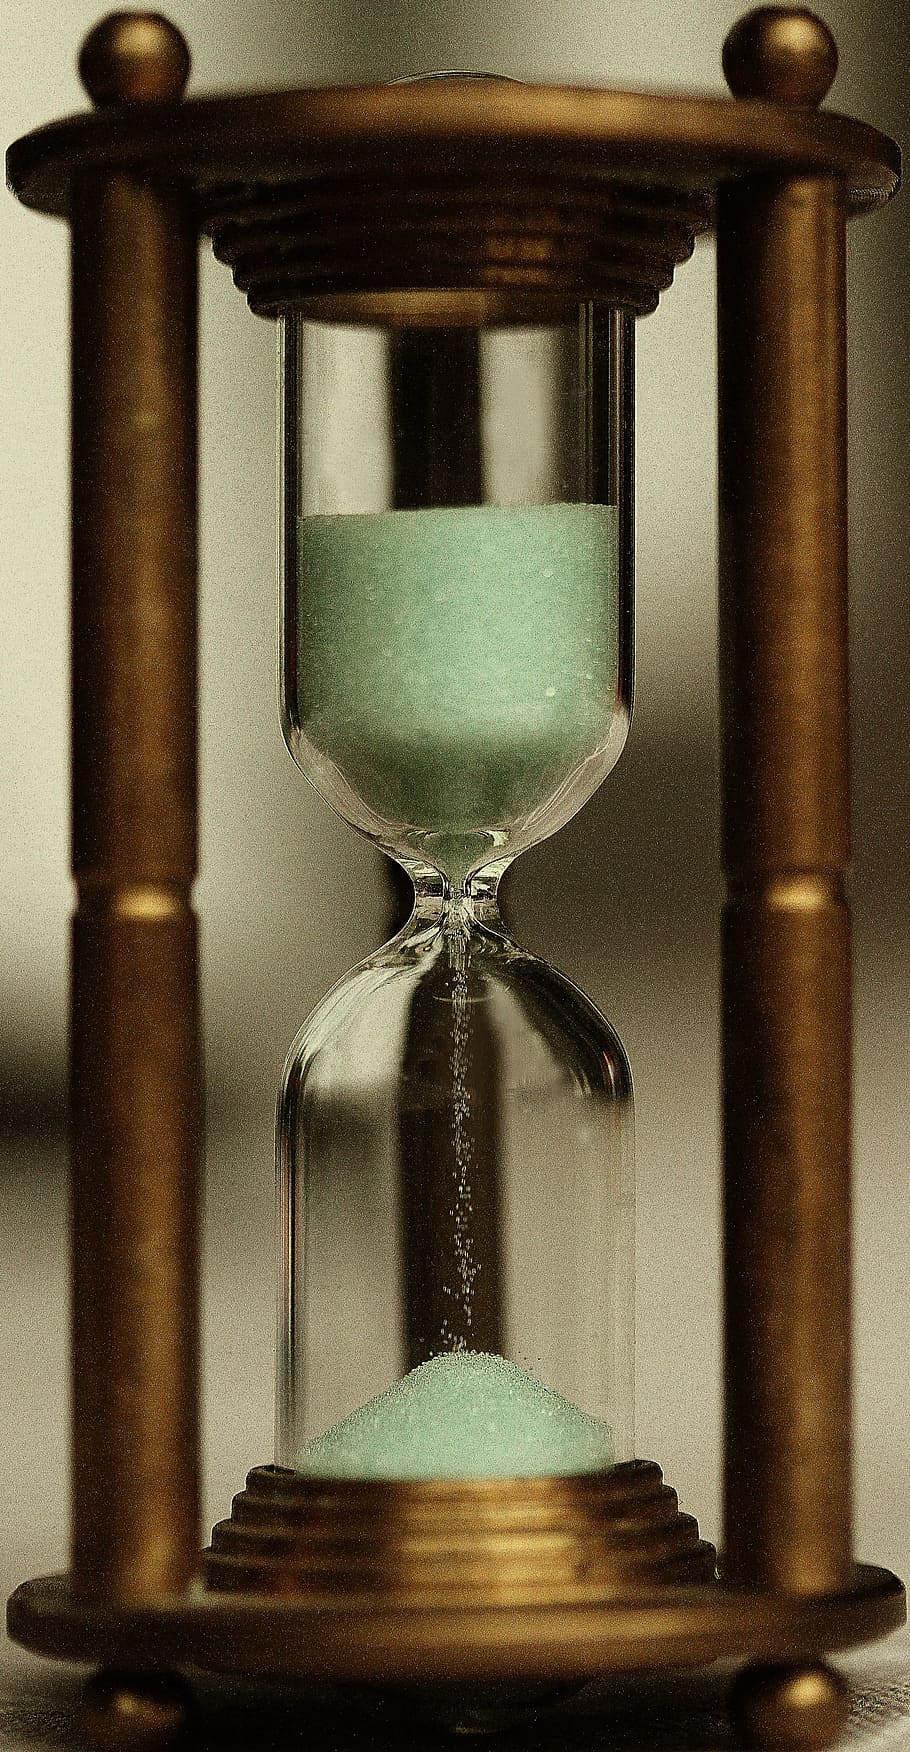 close-up, brown, framed, hour glass, hourglass, sand, egg timer, amount of time, timepiece, brass